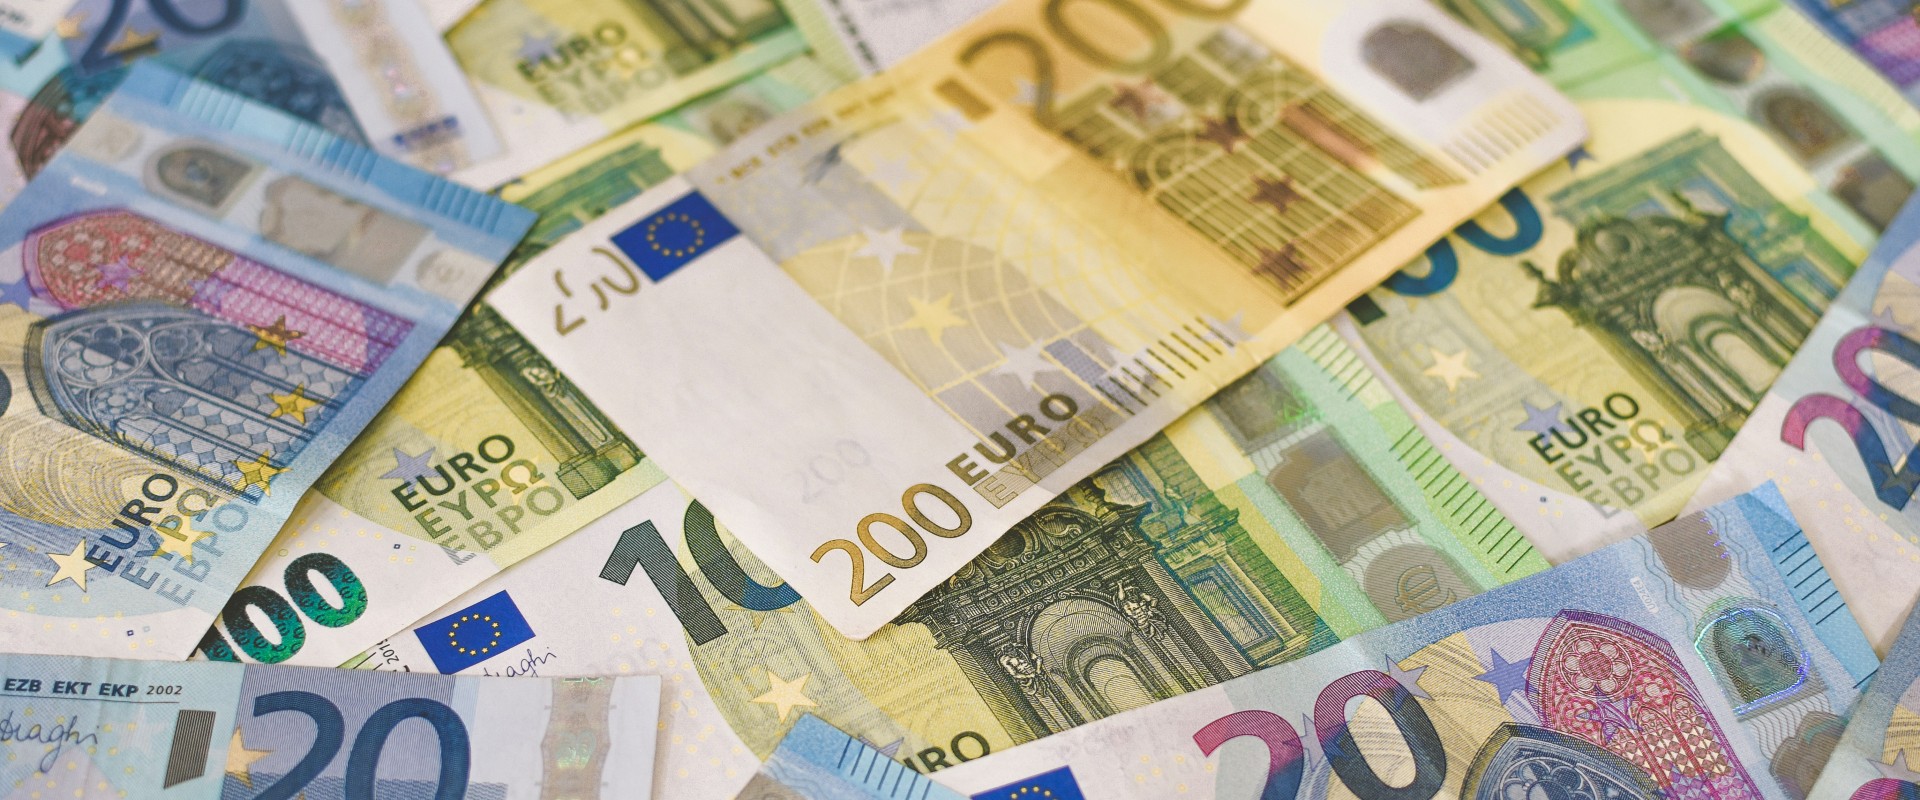 Wash of Euro notes creating an unbroken landscape